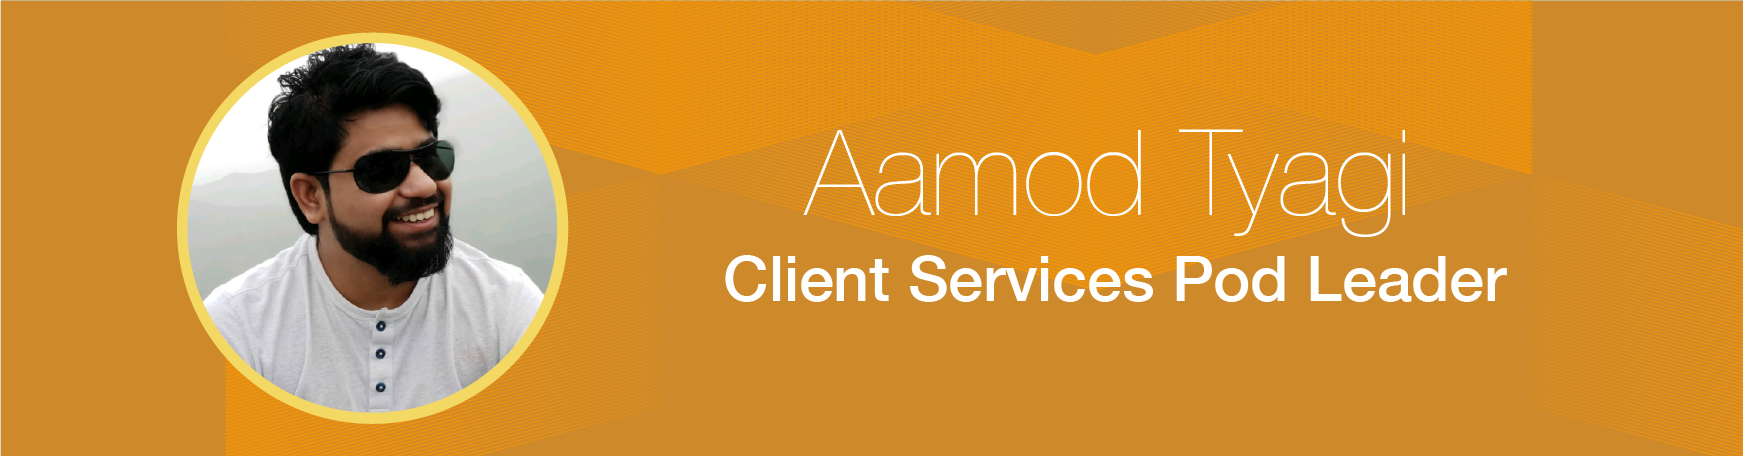 Aamod Footer-01